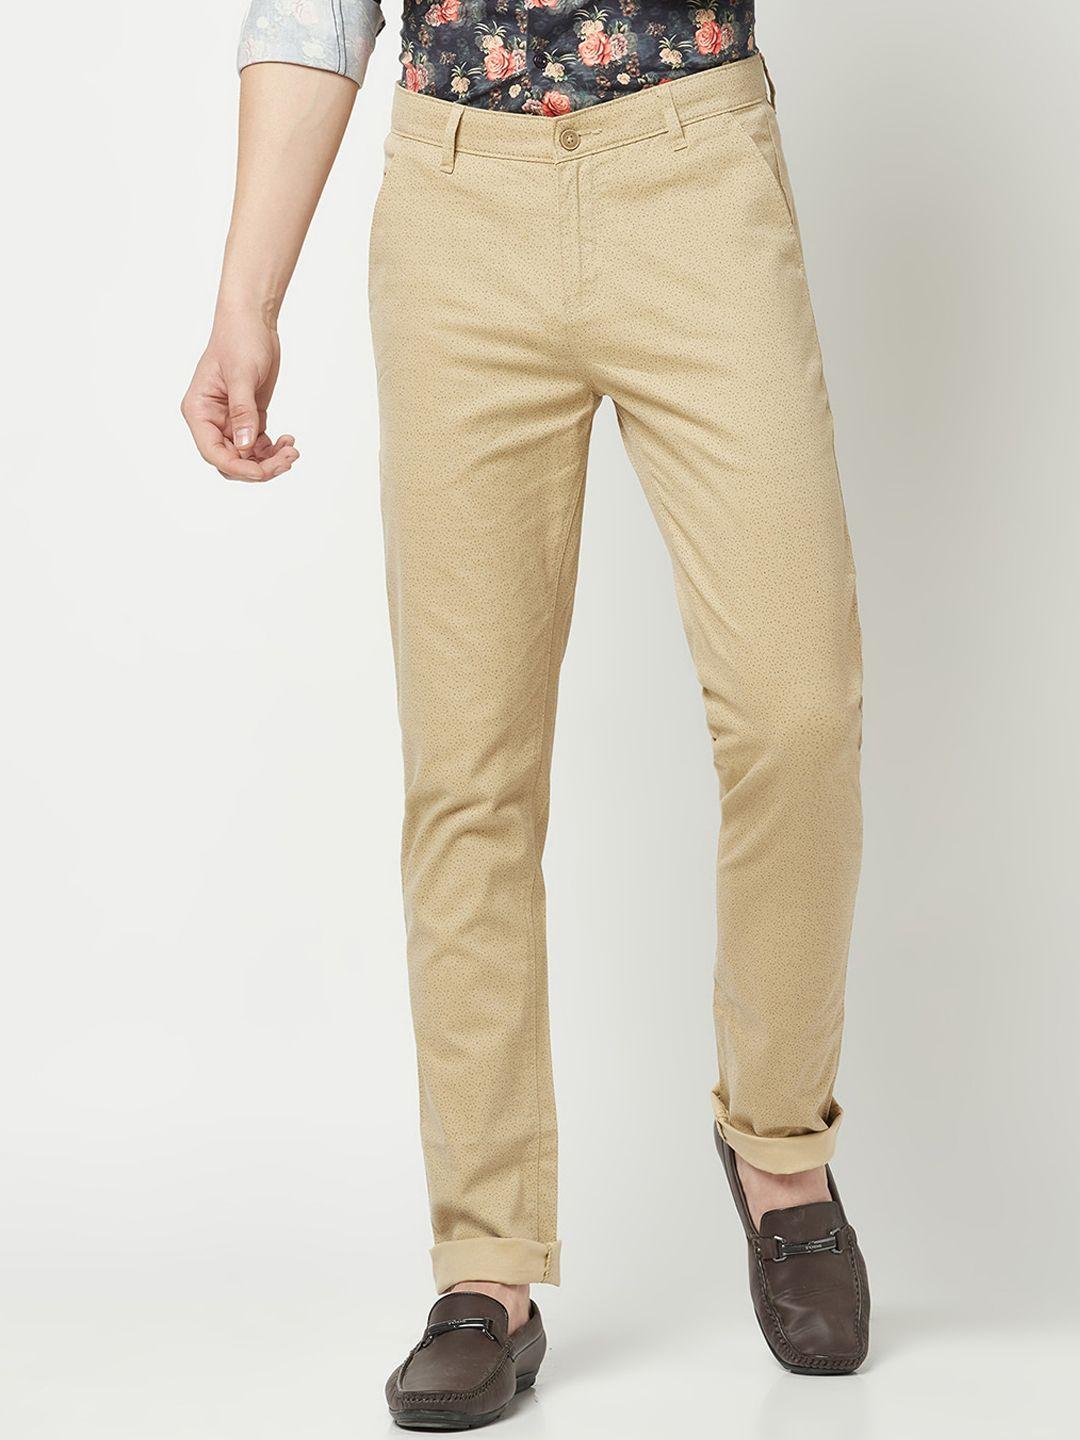 crimsoune club men printed relaxed mid-rise chinos